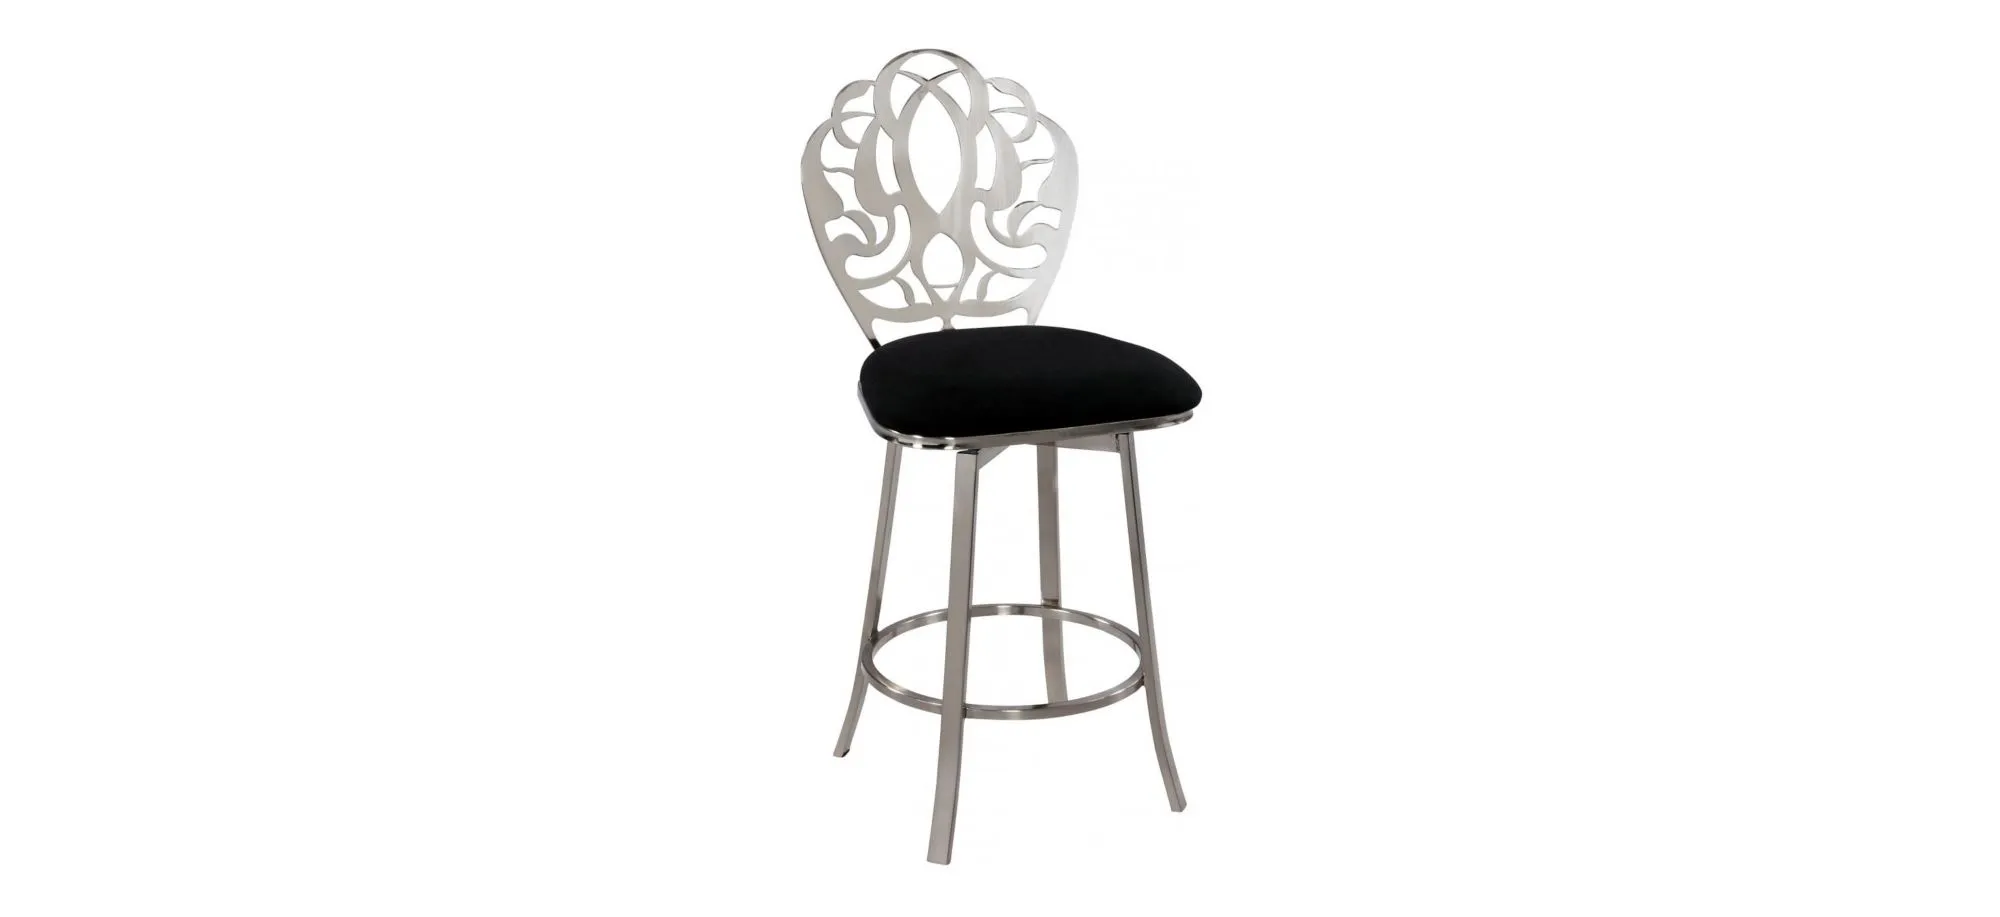 Everette Swivel Counter Stool in Black / Brushed Nickel by Chintaly Imports